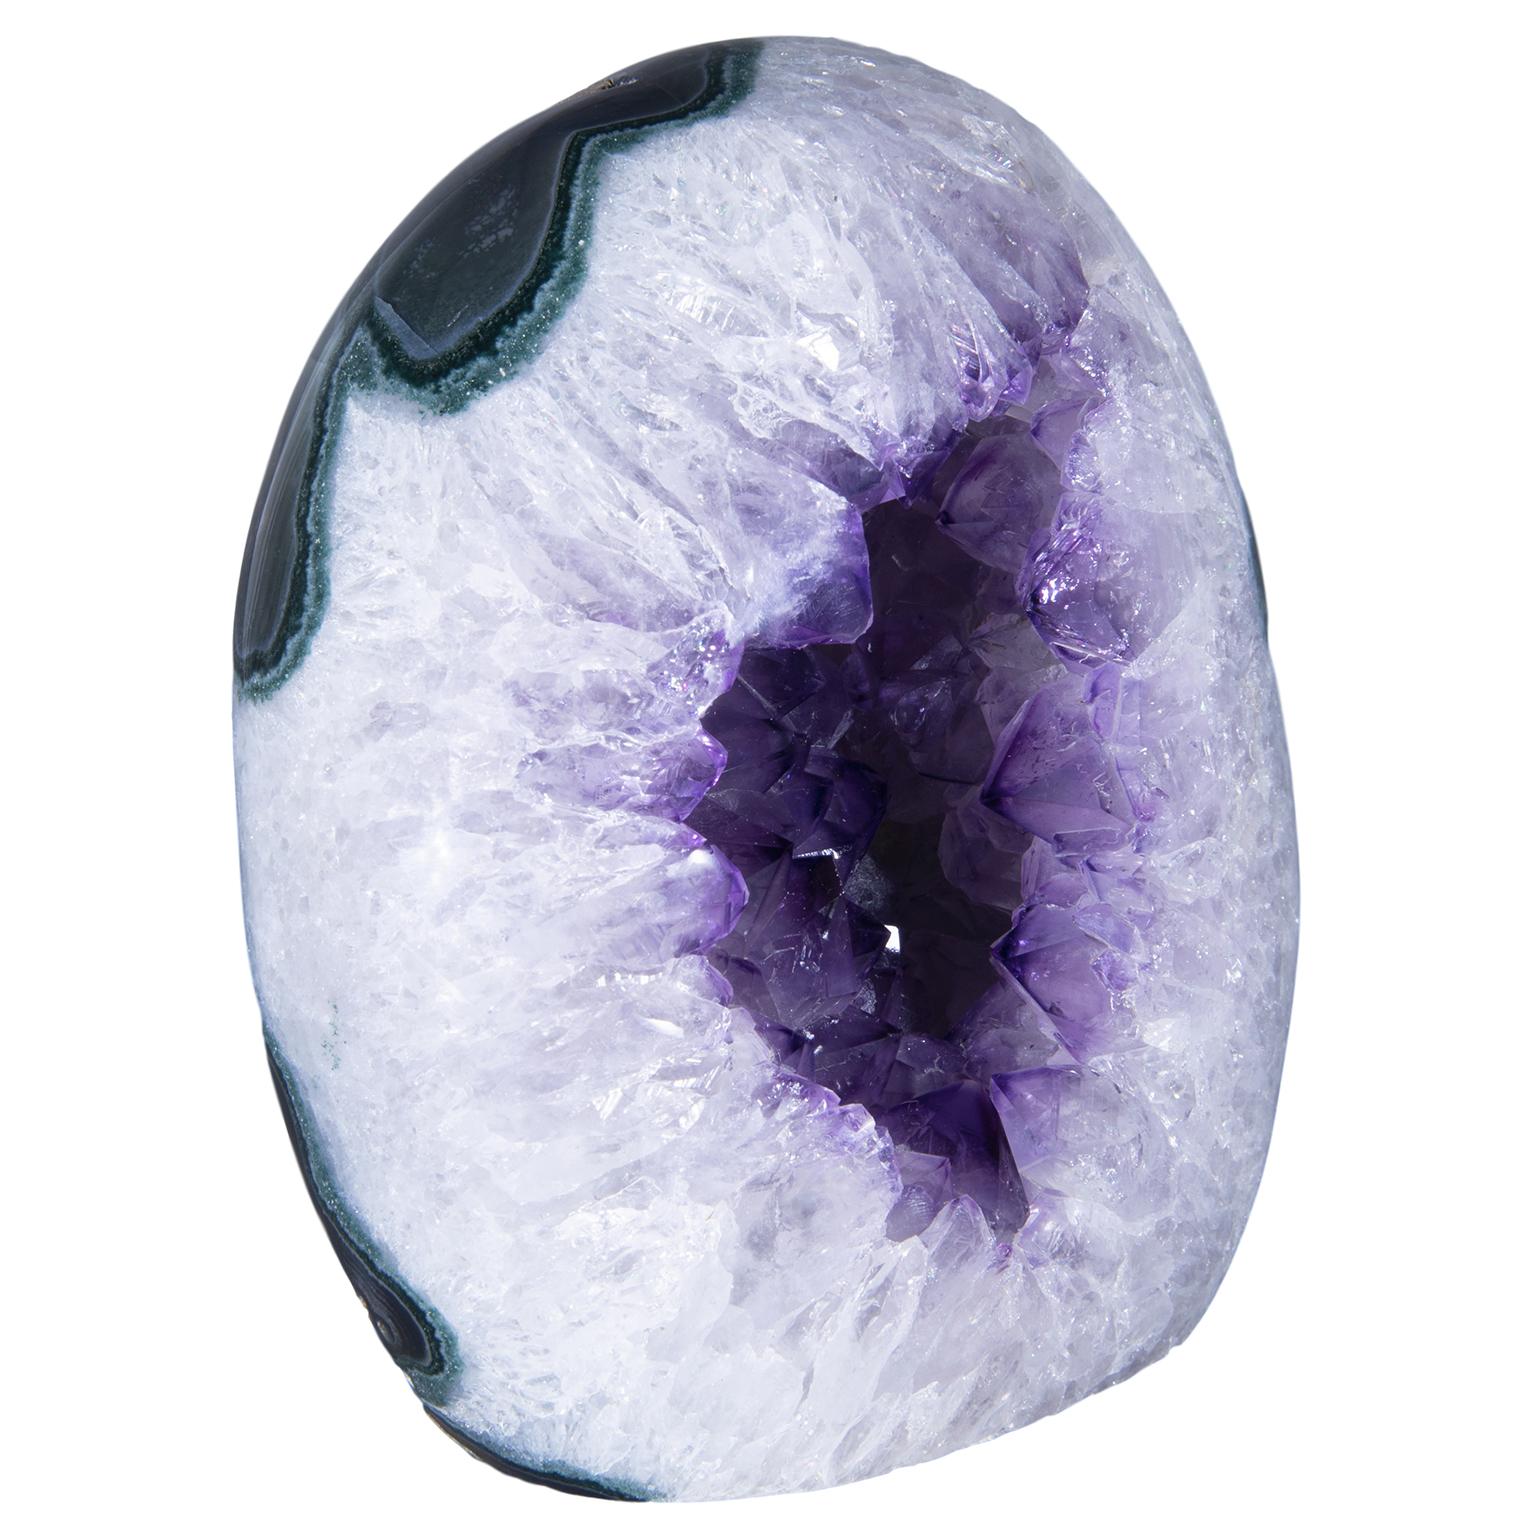 Colors fuse together in this uniquely beautiful piece, presenting the viewer with a small geode polished in the round. 

At the heart of the piece we can see intense deep purple amethyst crystals with an impressive peak size, surrounded by a white